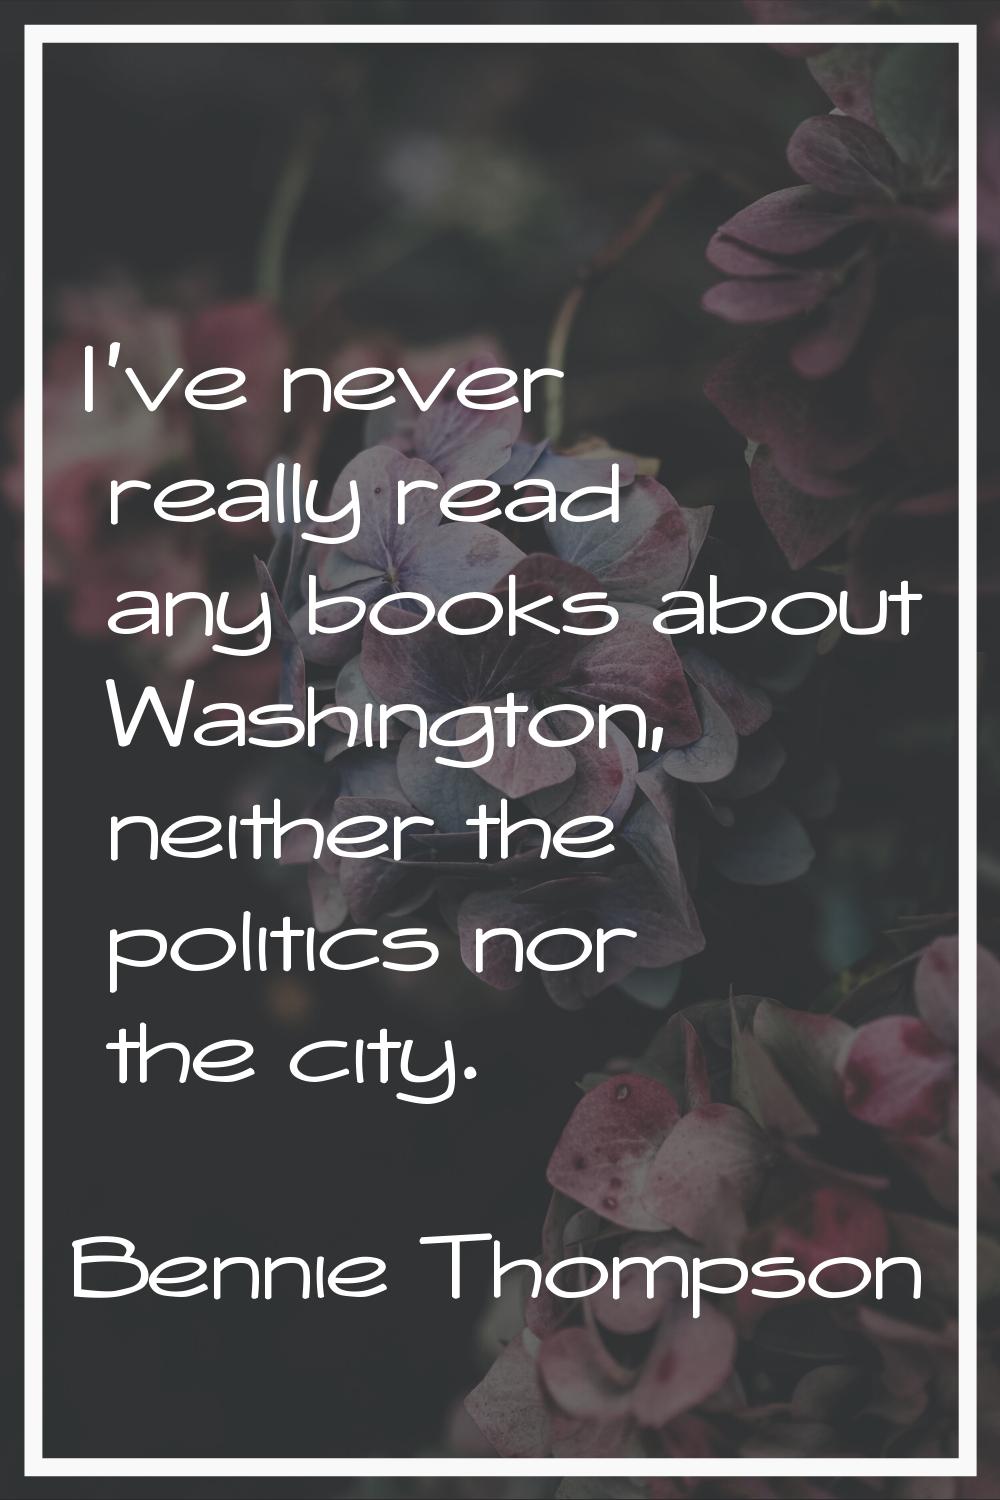 I've never really read any books about Washington, neither the politics nor the city.